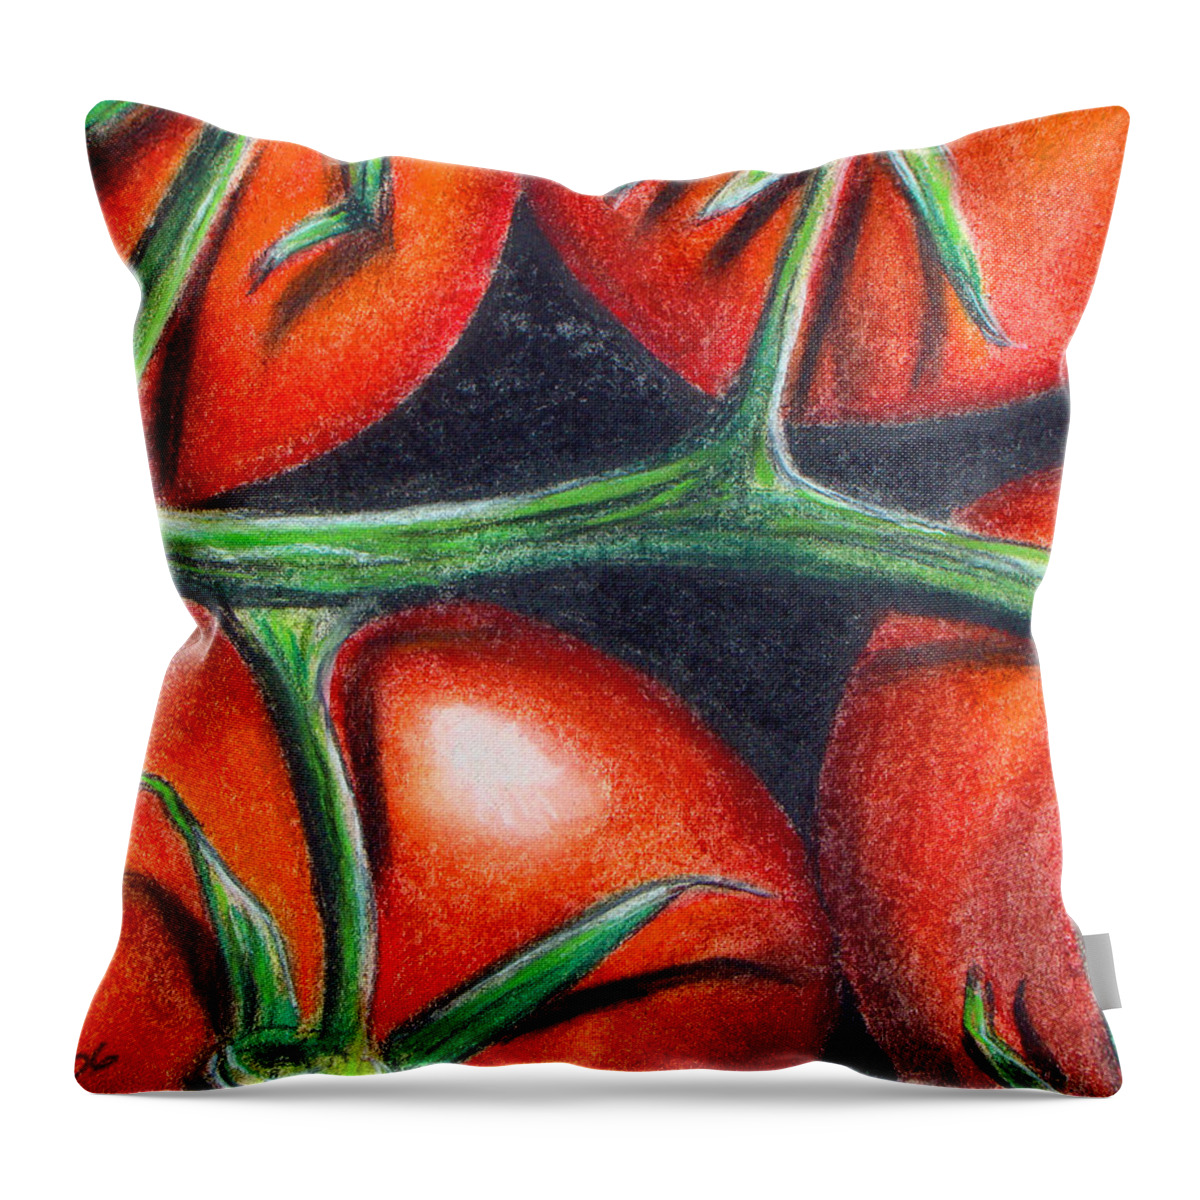 Pastel Throw Pillow featuring the painting Toms on the Vine by Michael Foltz